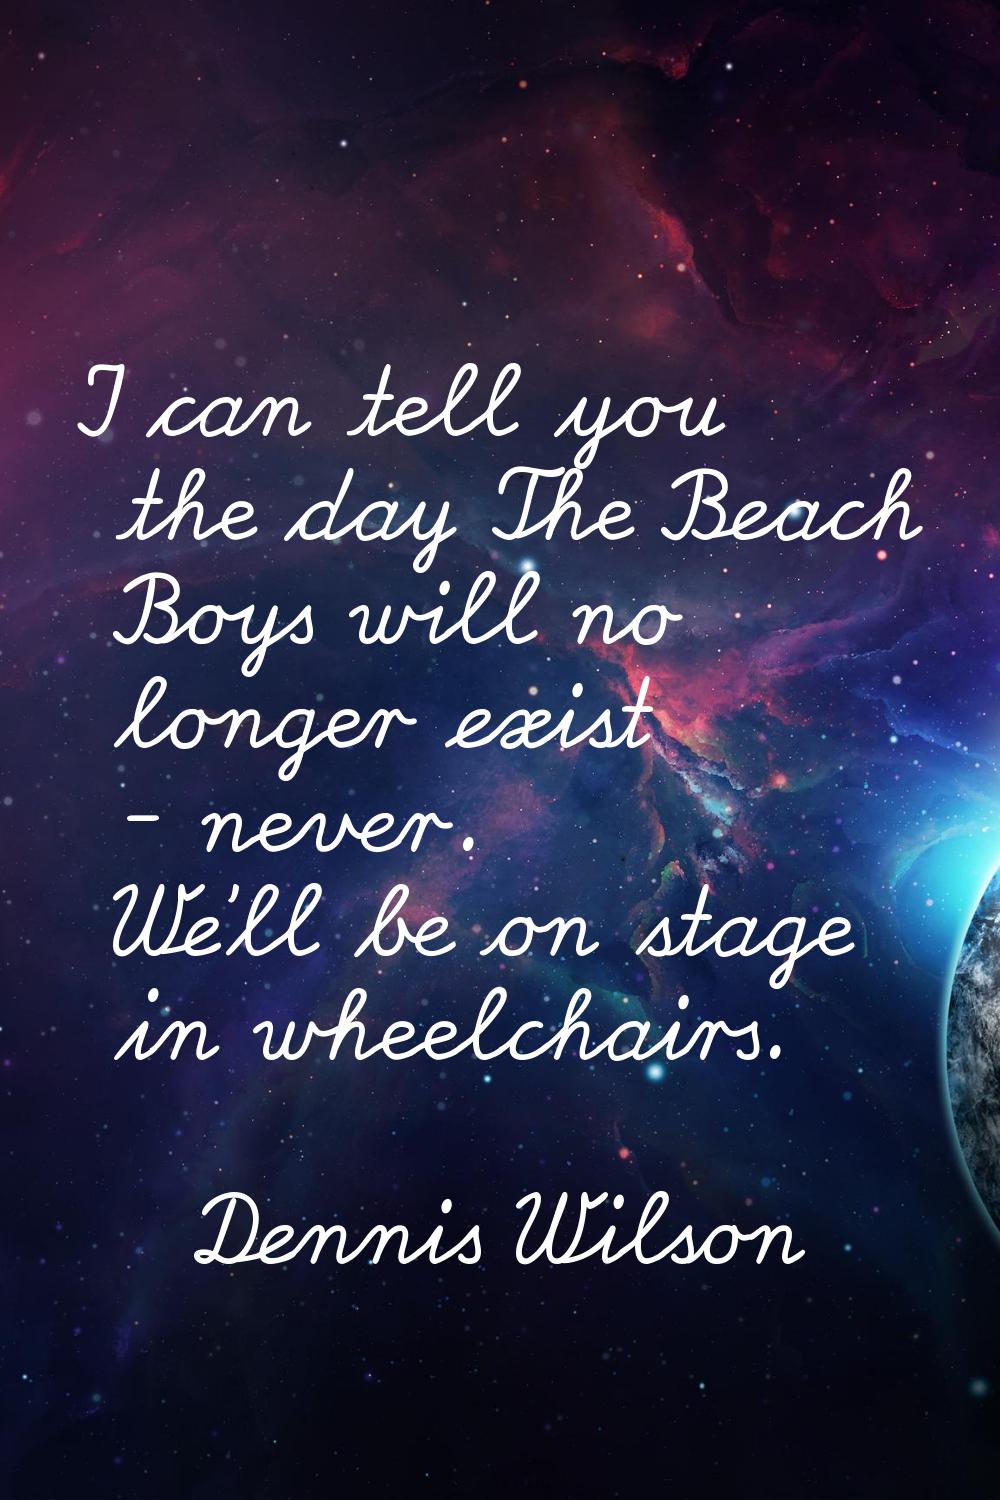 I can tell you the day The Beach Boys will no longer exist - never. We'll be on stage in wheelchair